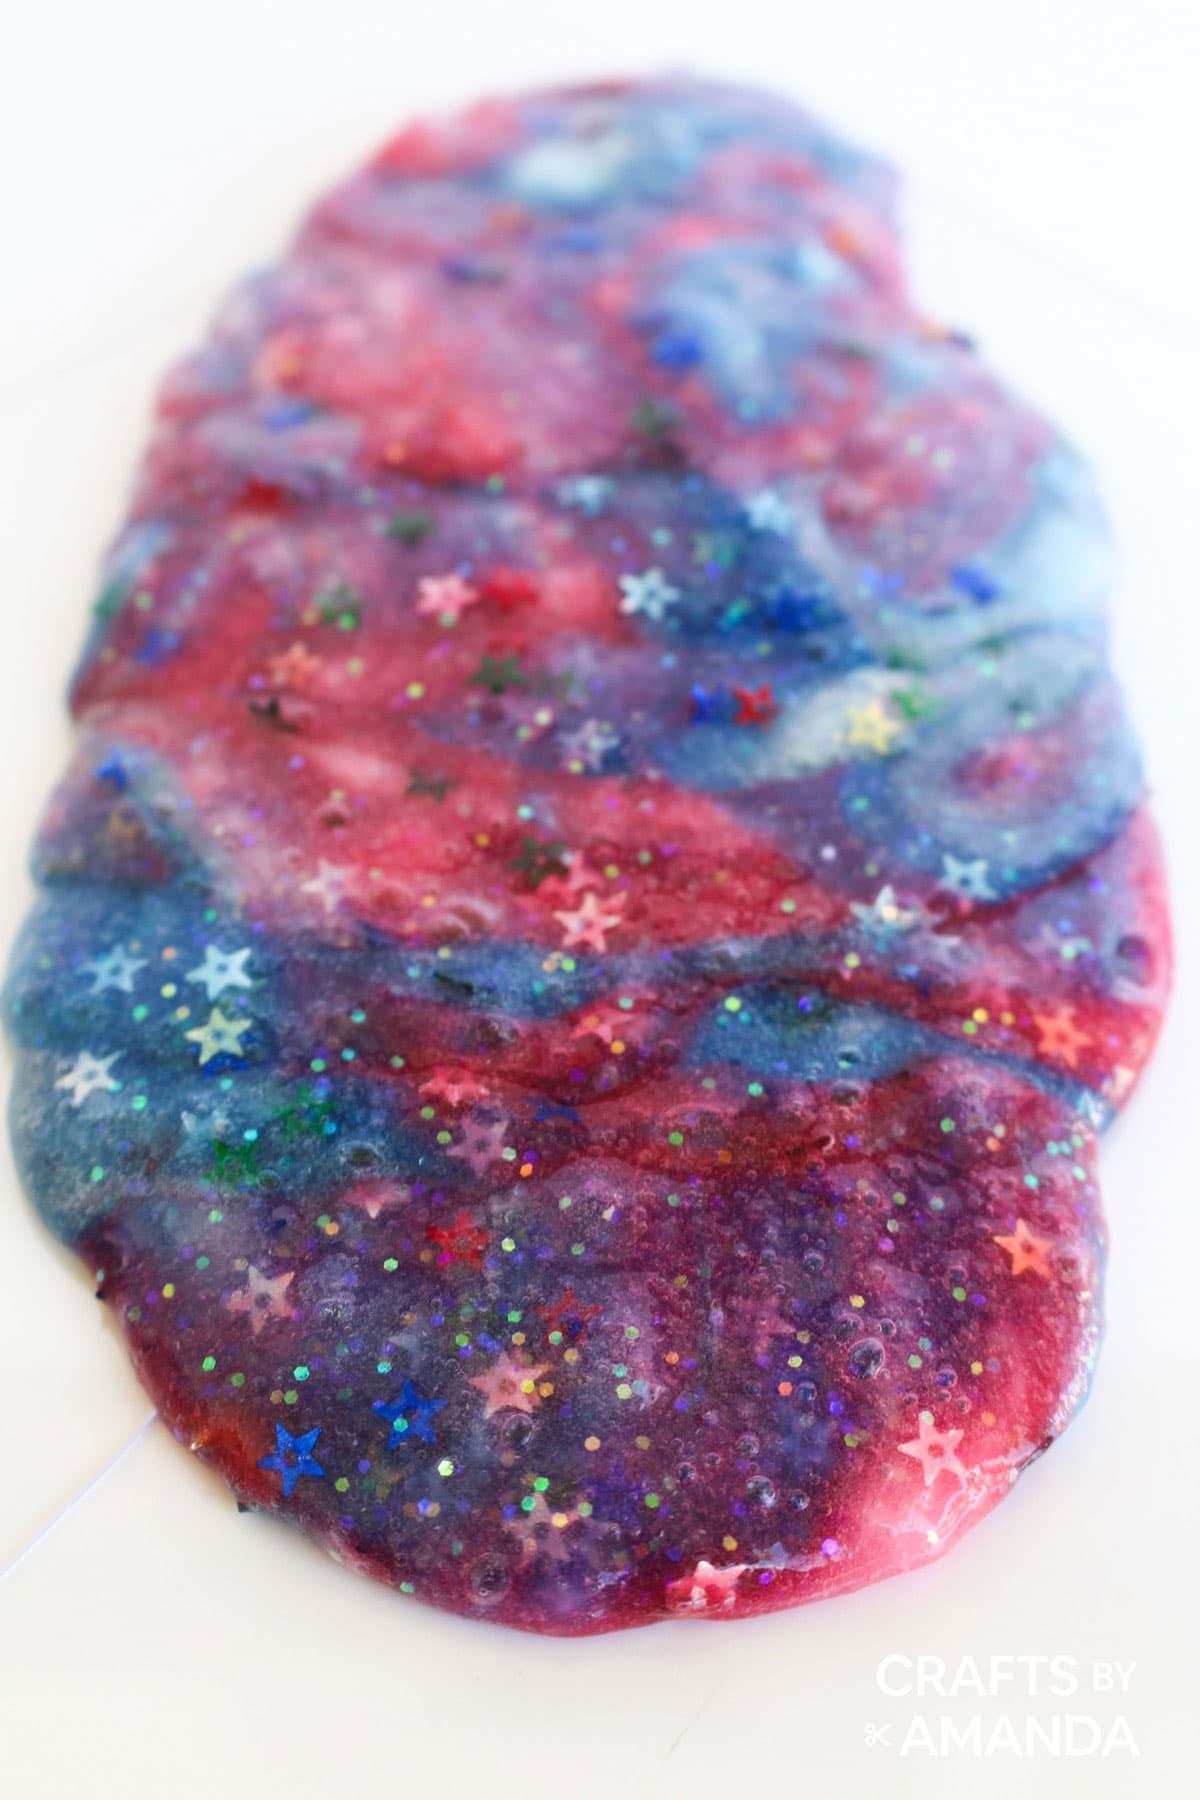 slime with red white and blue muddied together